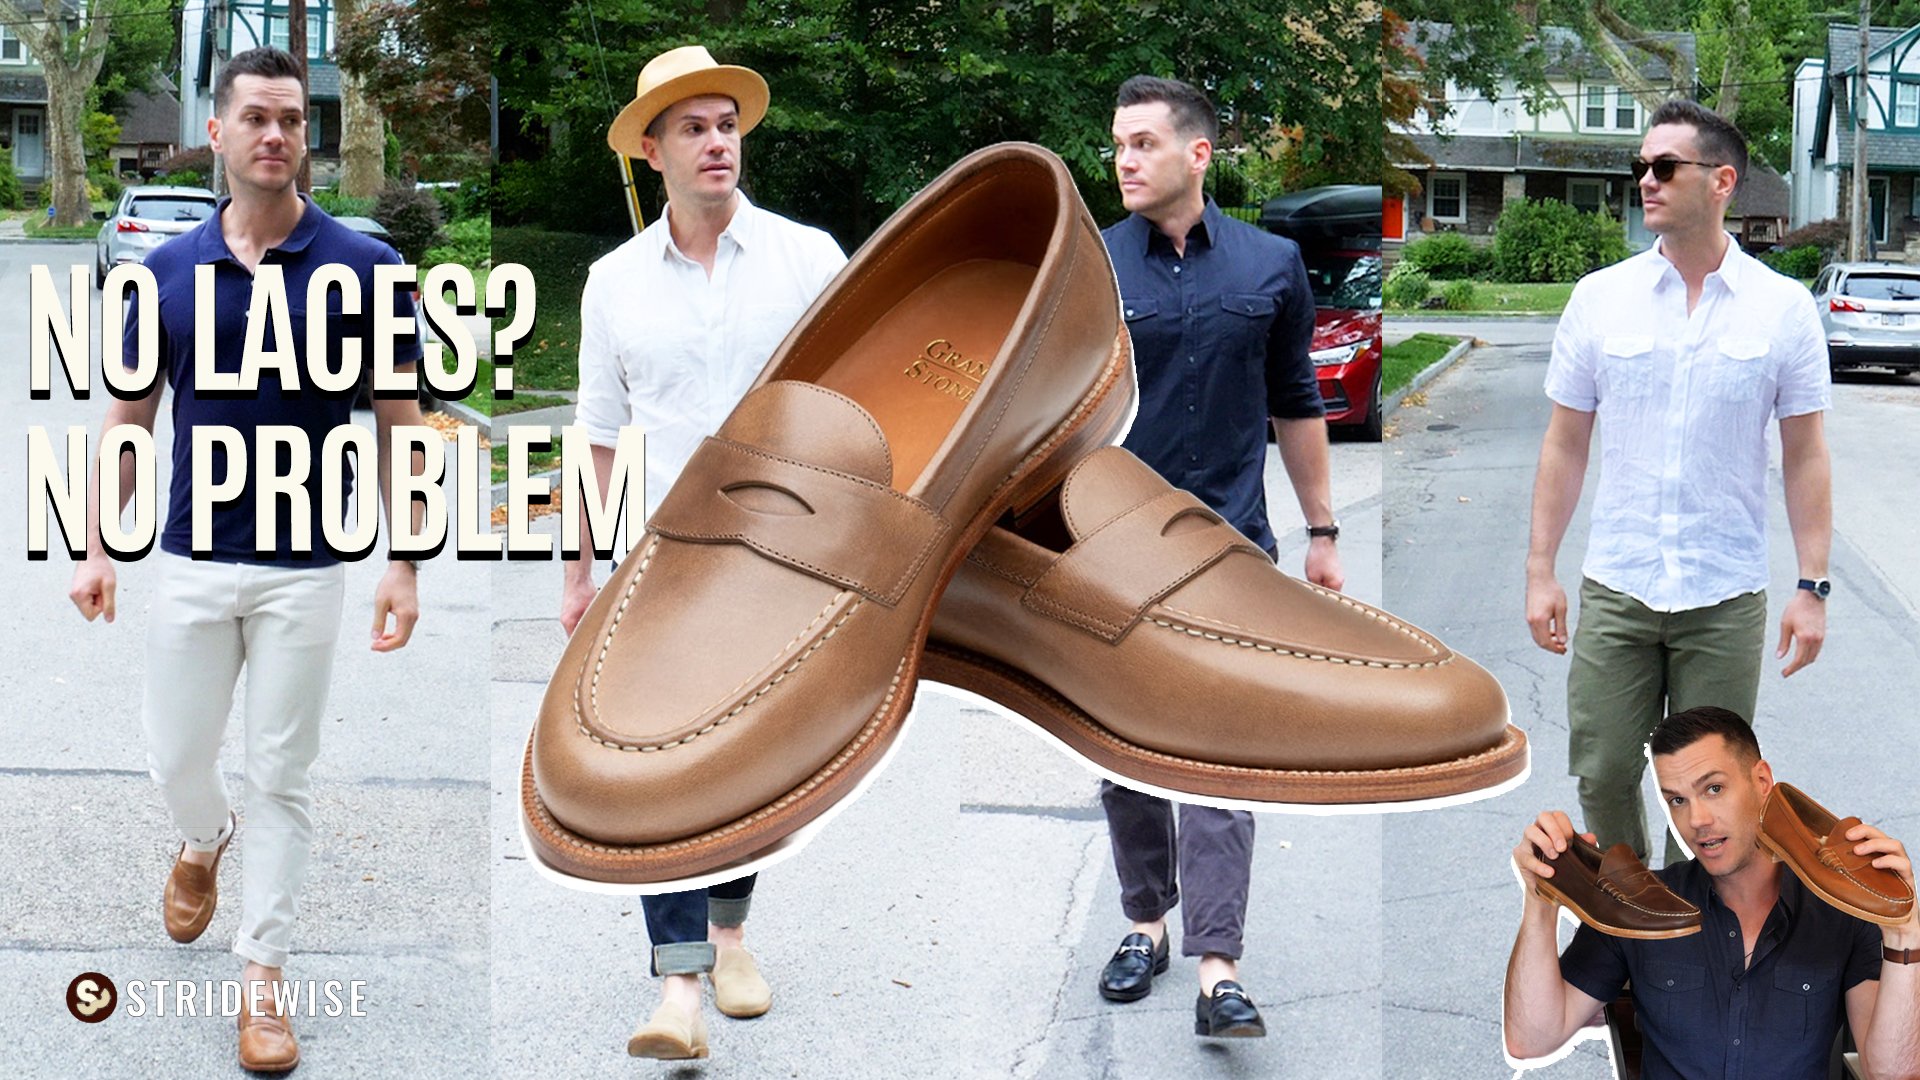 Best Loafers for Men: 12 Options to Update Your Wardrobe